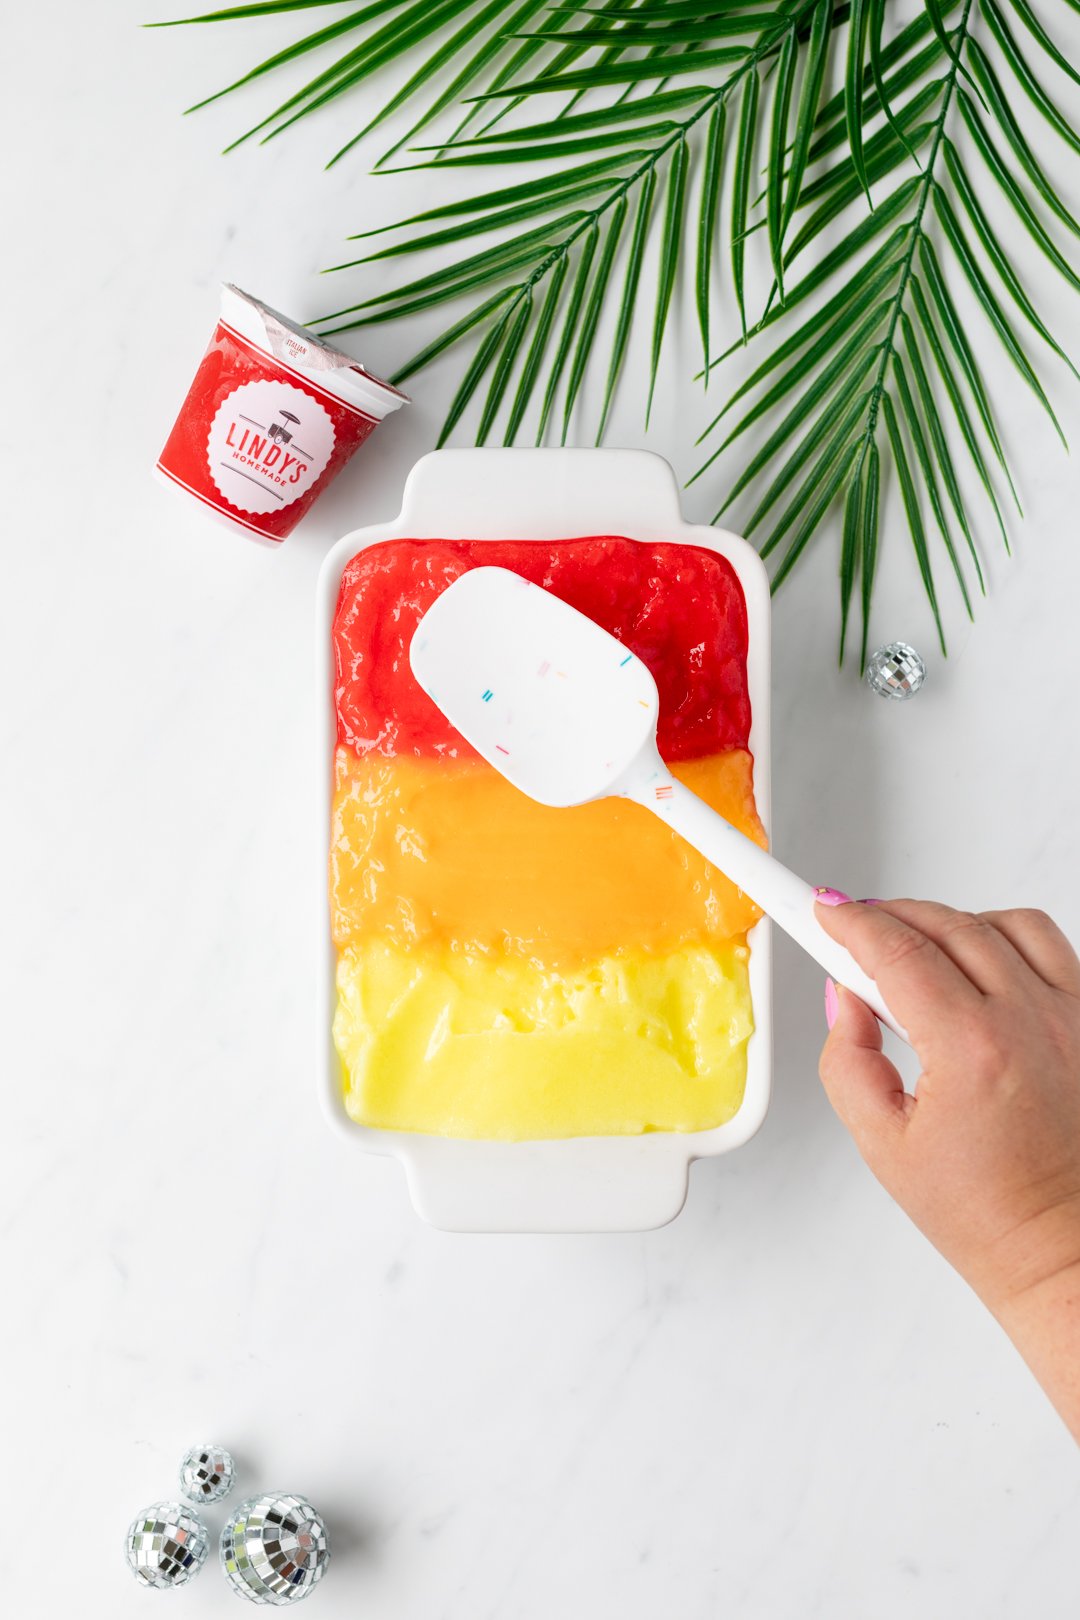 showing how to make italian ice that is scoopable using store-bought Italian ice.